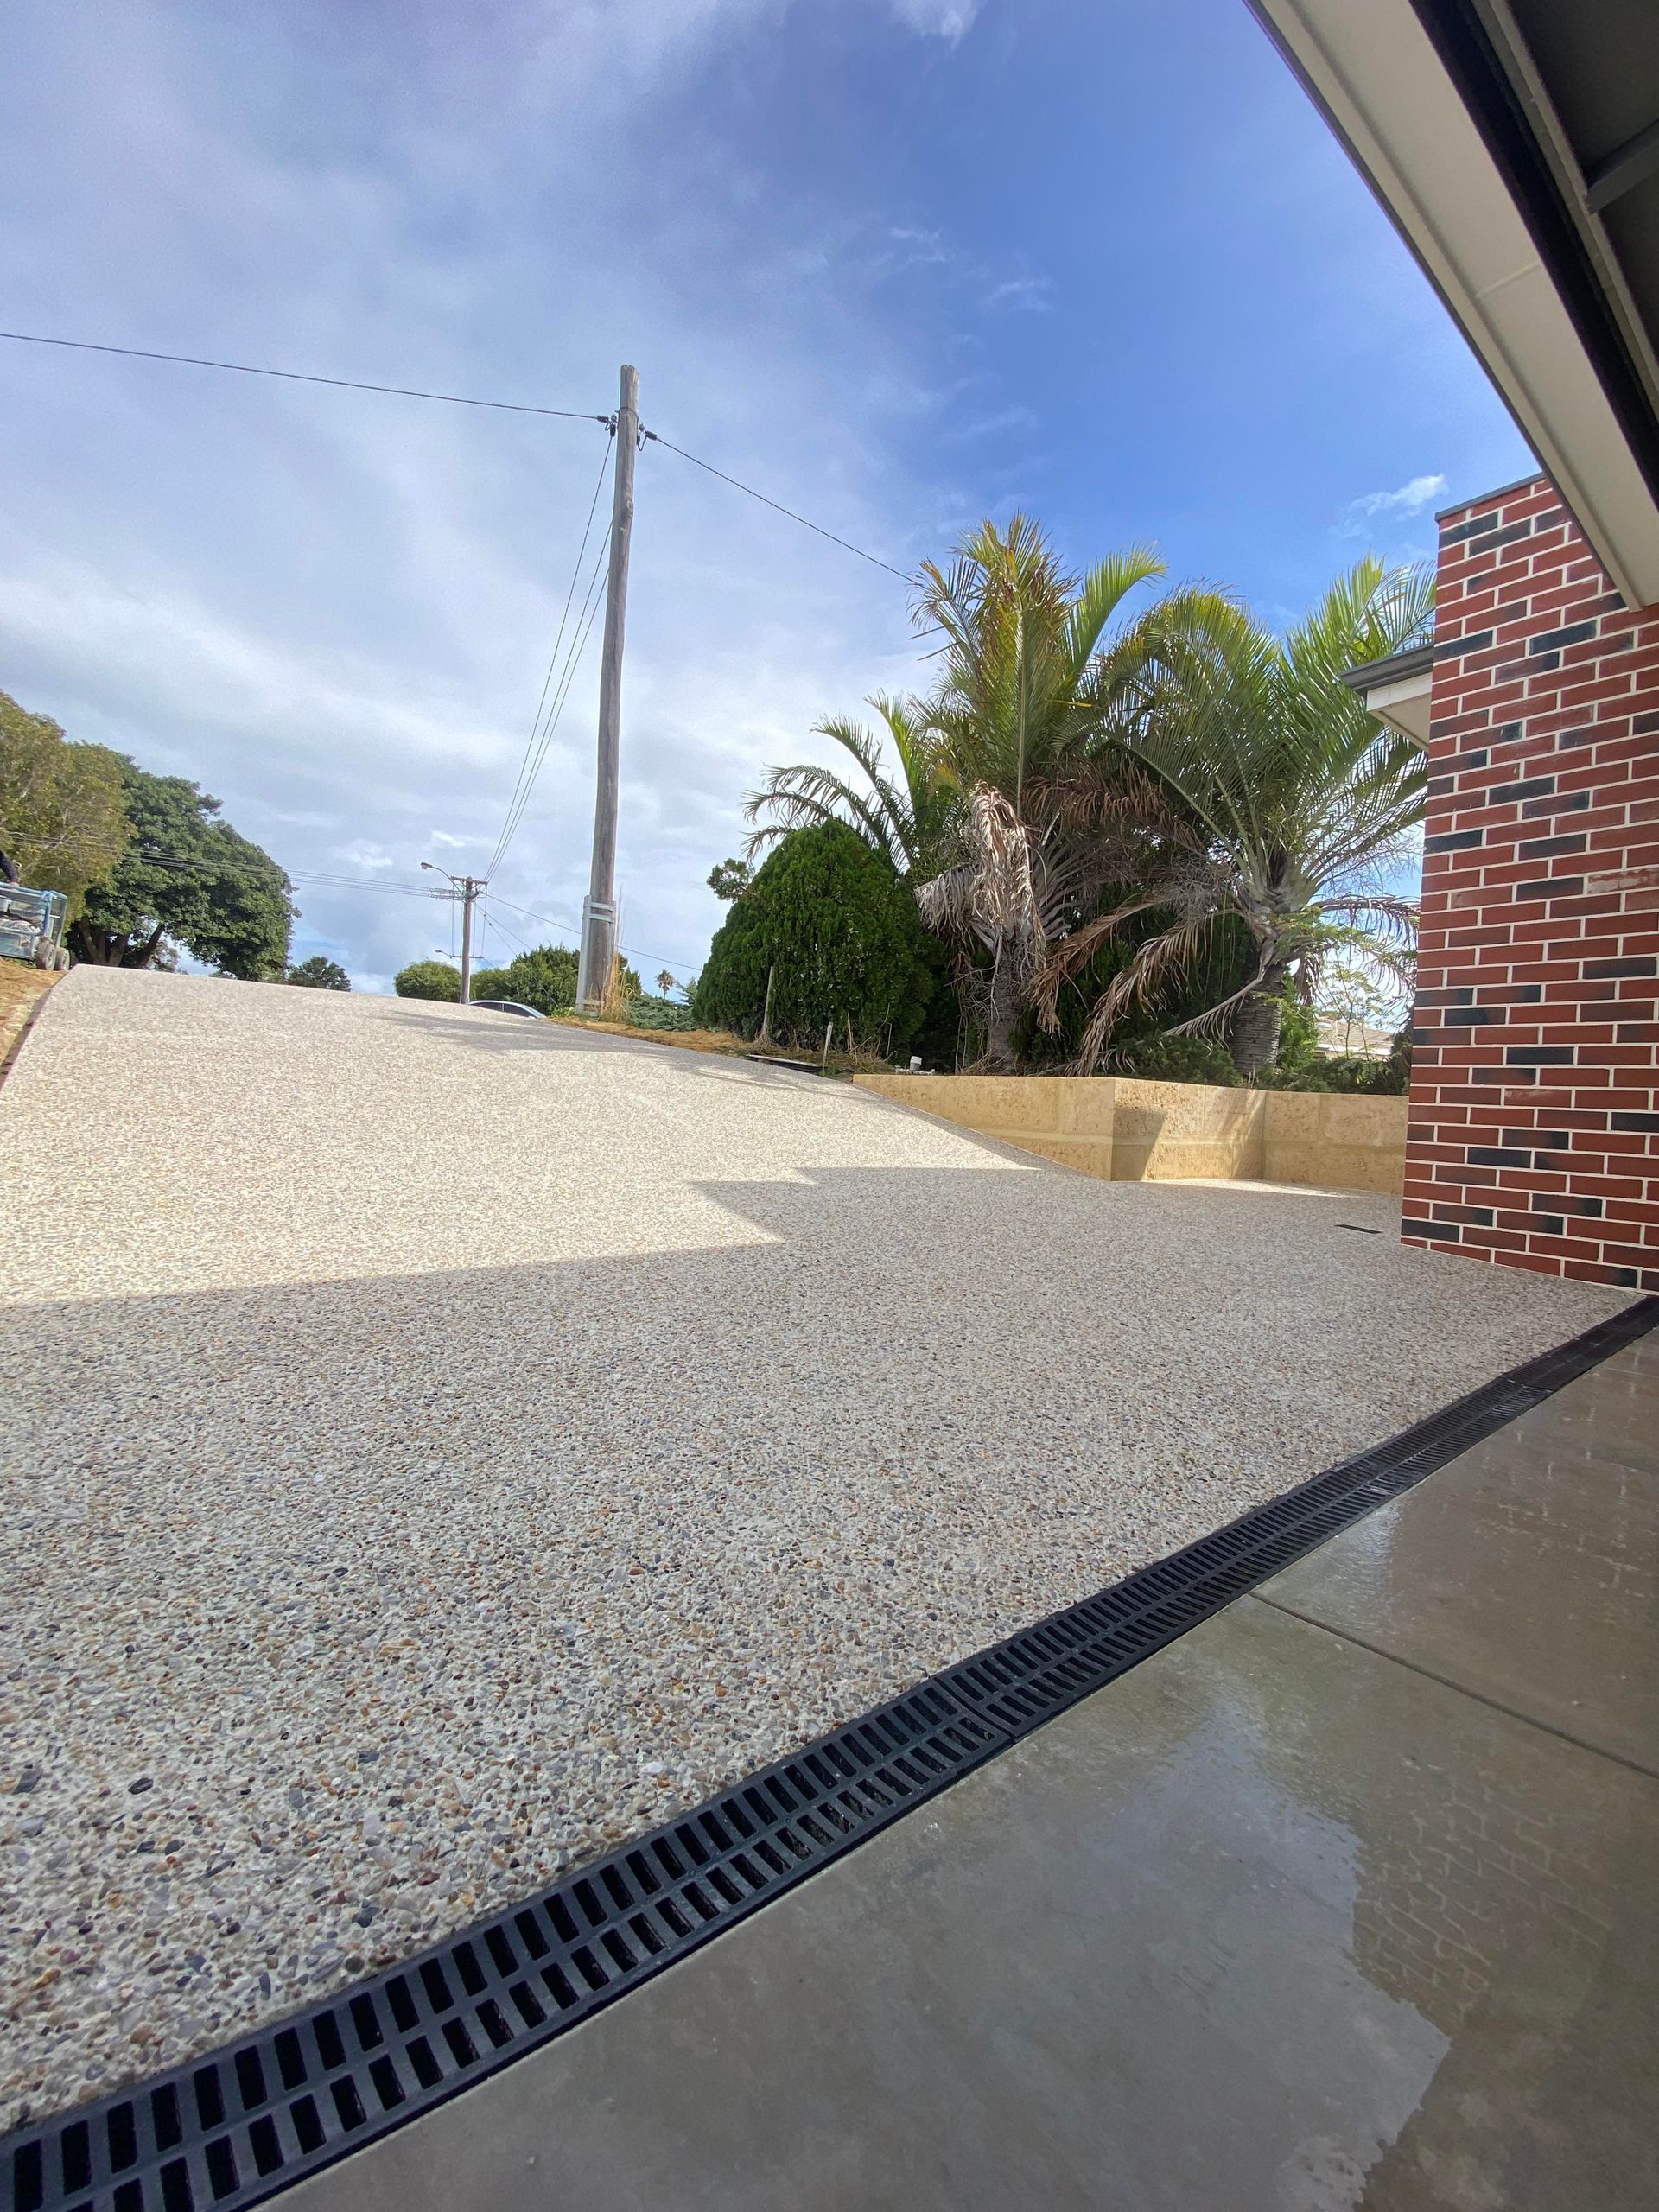 Concrete Driveway with Drain for Water Run-off in Perth